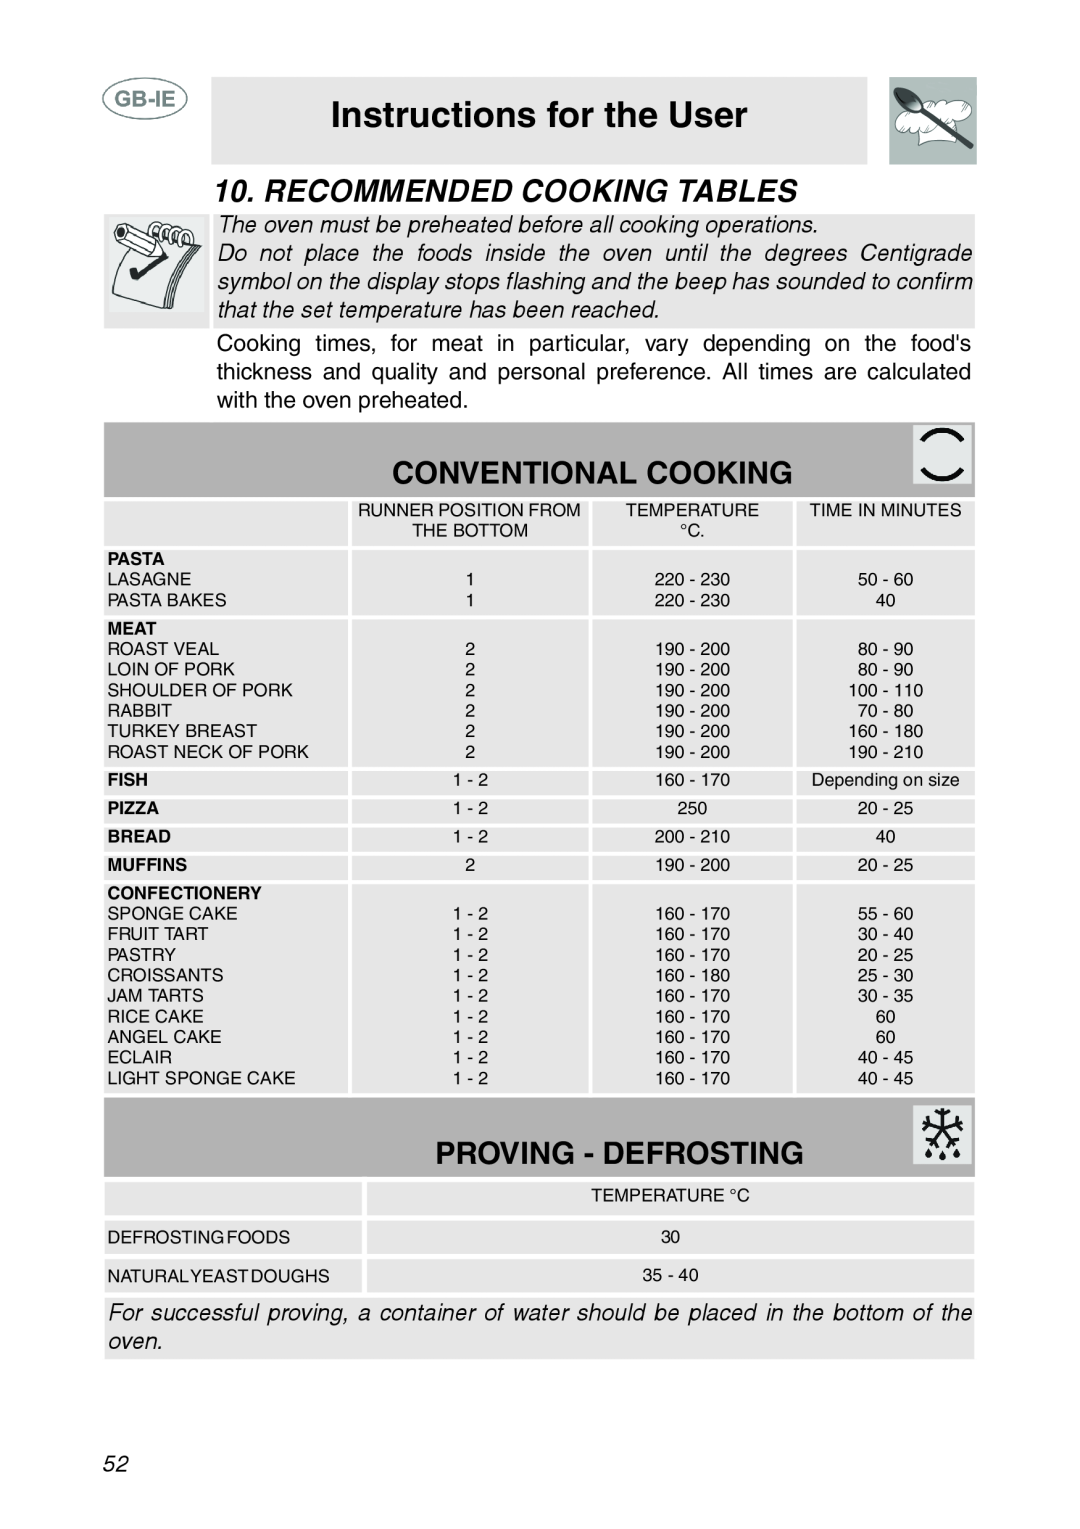 Smeg XXSC111P manual Recommended Cooking Tables, Conventional Cooking, Proving - Defrosting, Instructions for the User 